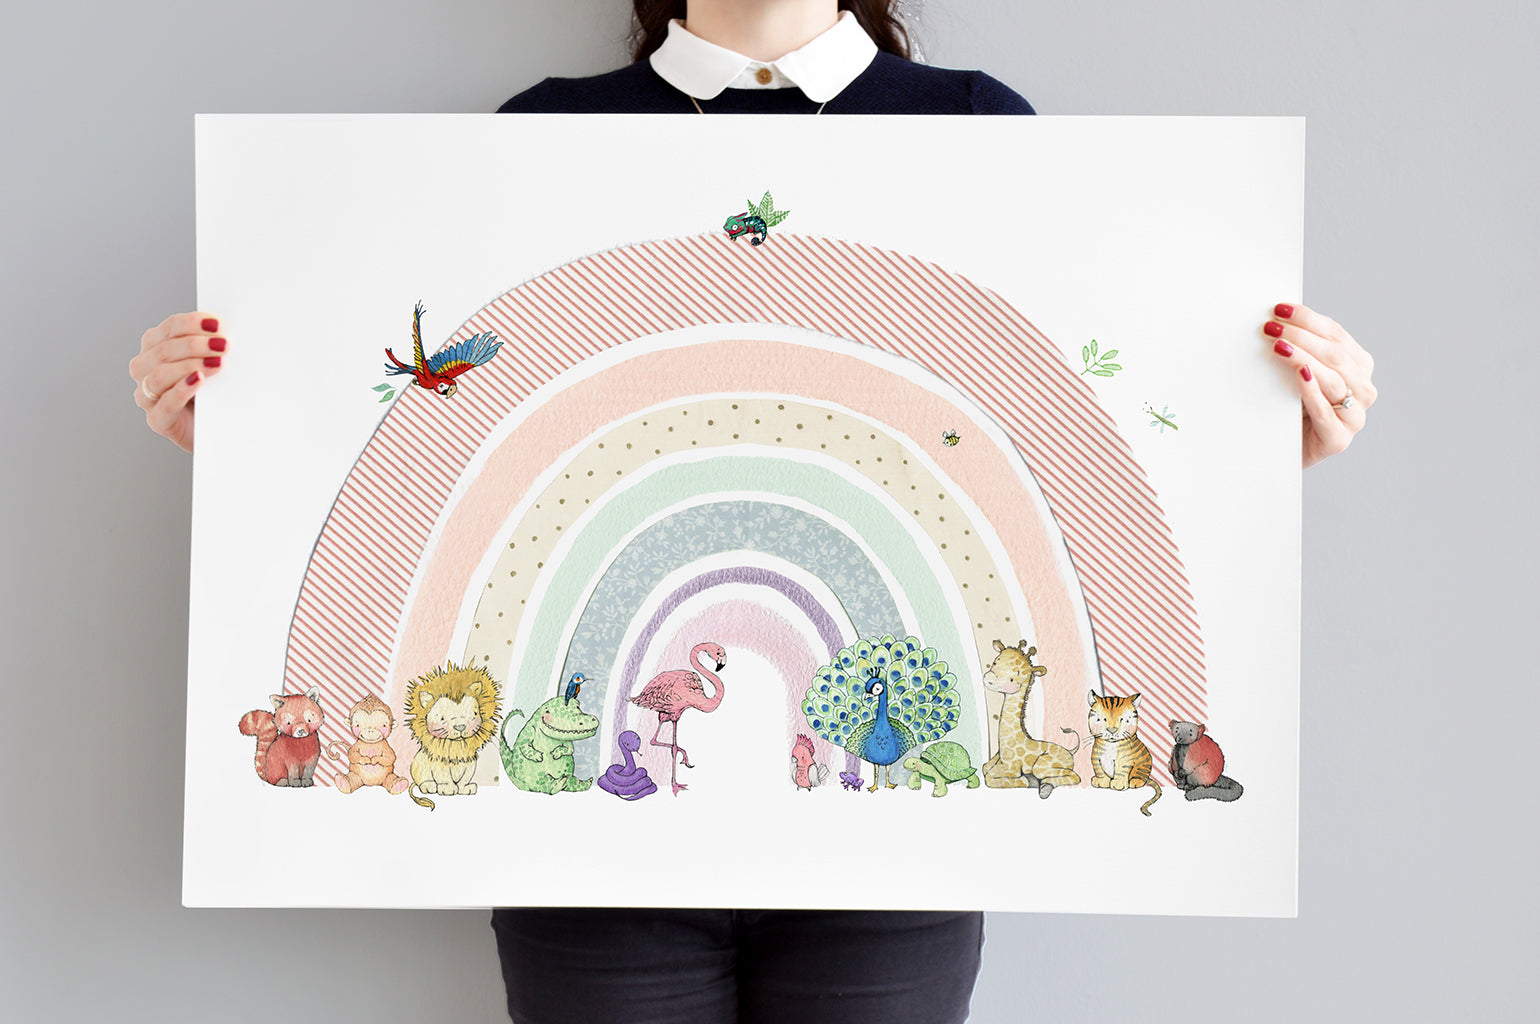 Big Children's Poster Print of a Full Bright Rainbow Picture